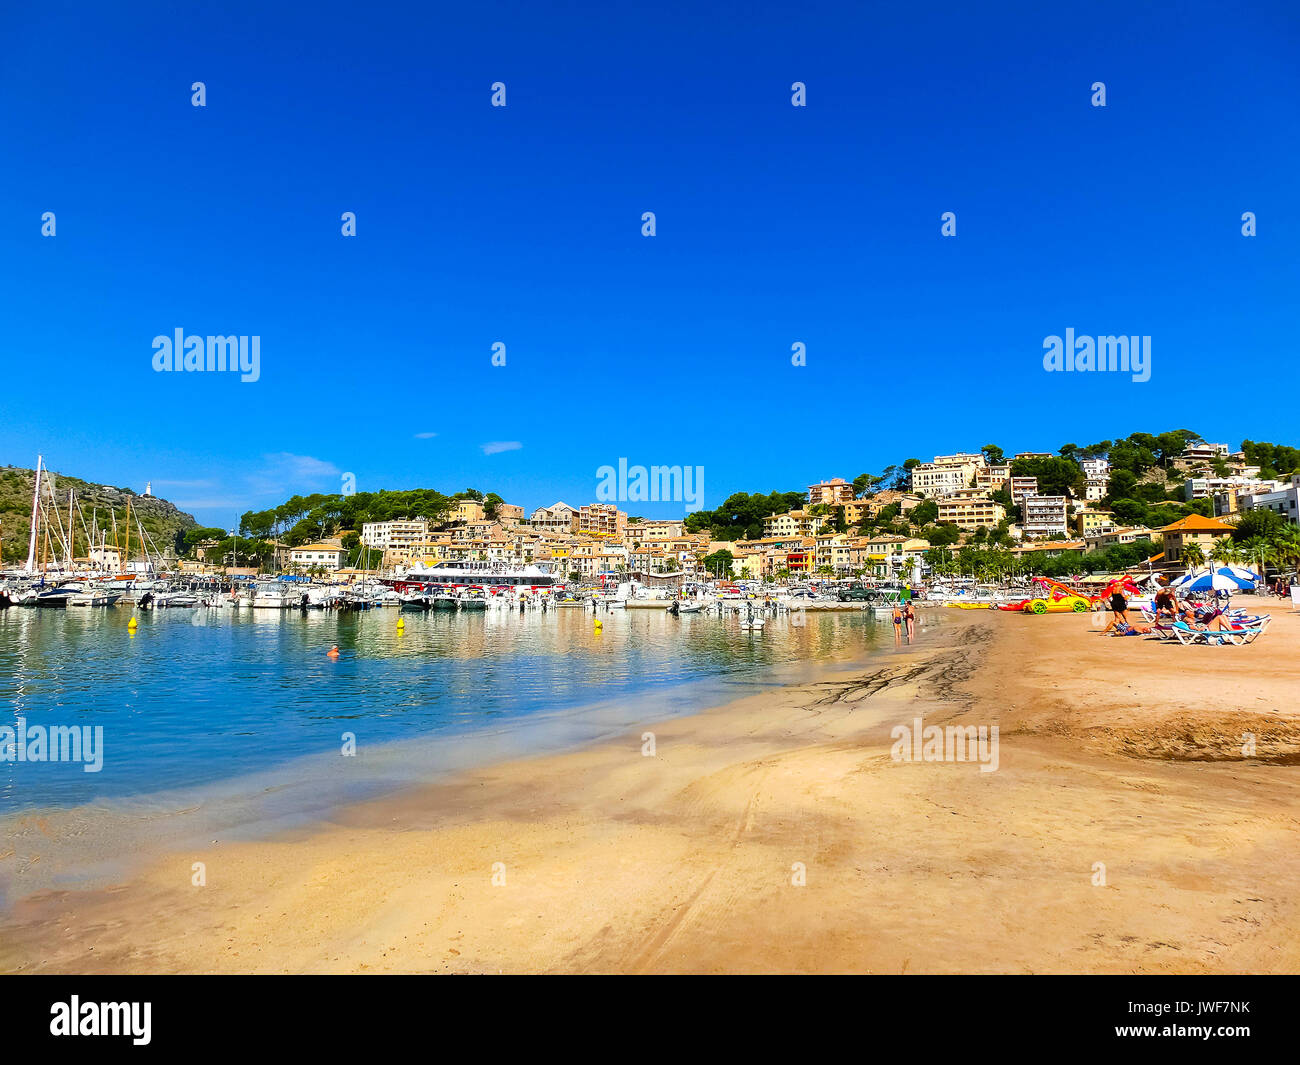 Palma de Mallorca, Spain - September 07, 2015: View of the beach of Port de Soller with people lying on sand, Soller, Balearic islands, Spain. Stock Photo